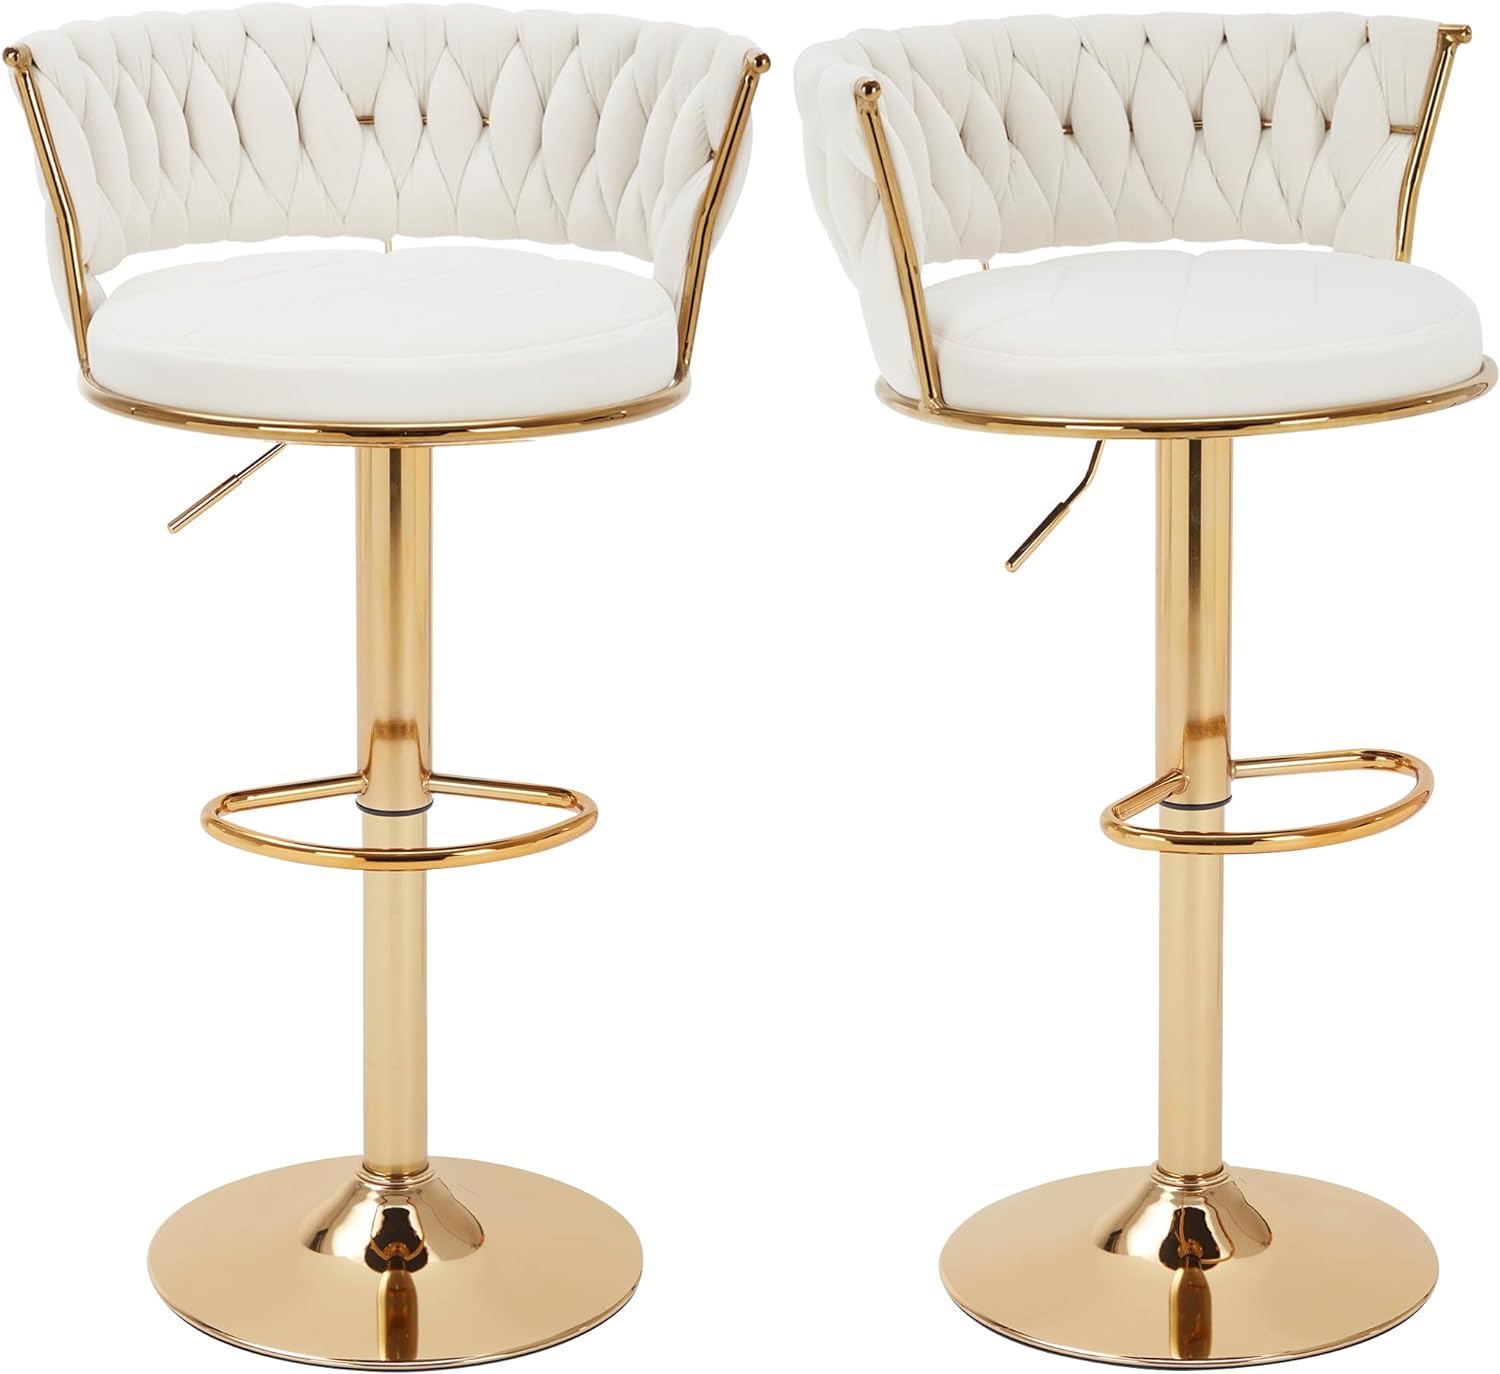 VECELO Bar Stools Set of 2, Adjustable Barstools Counter Height Stools with Back and Arm